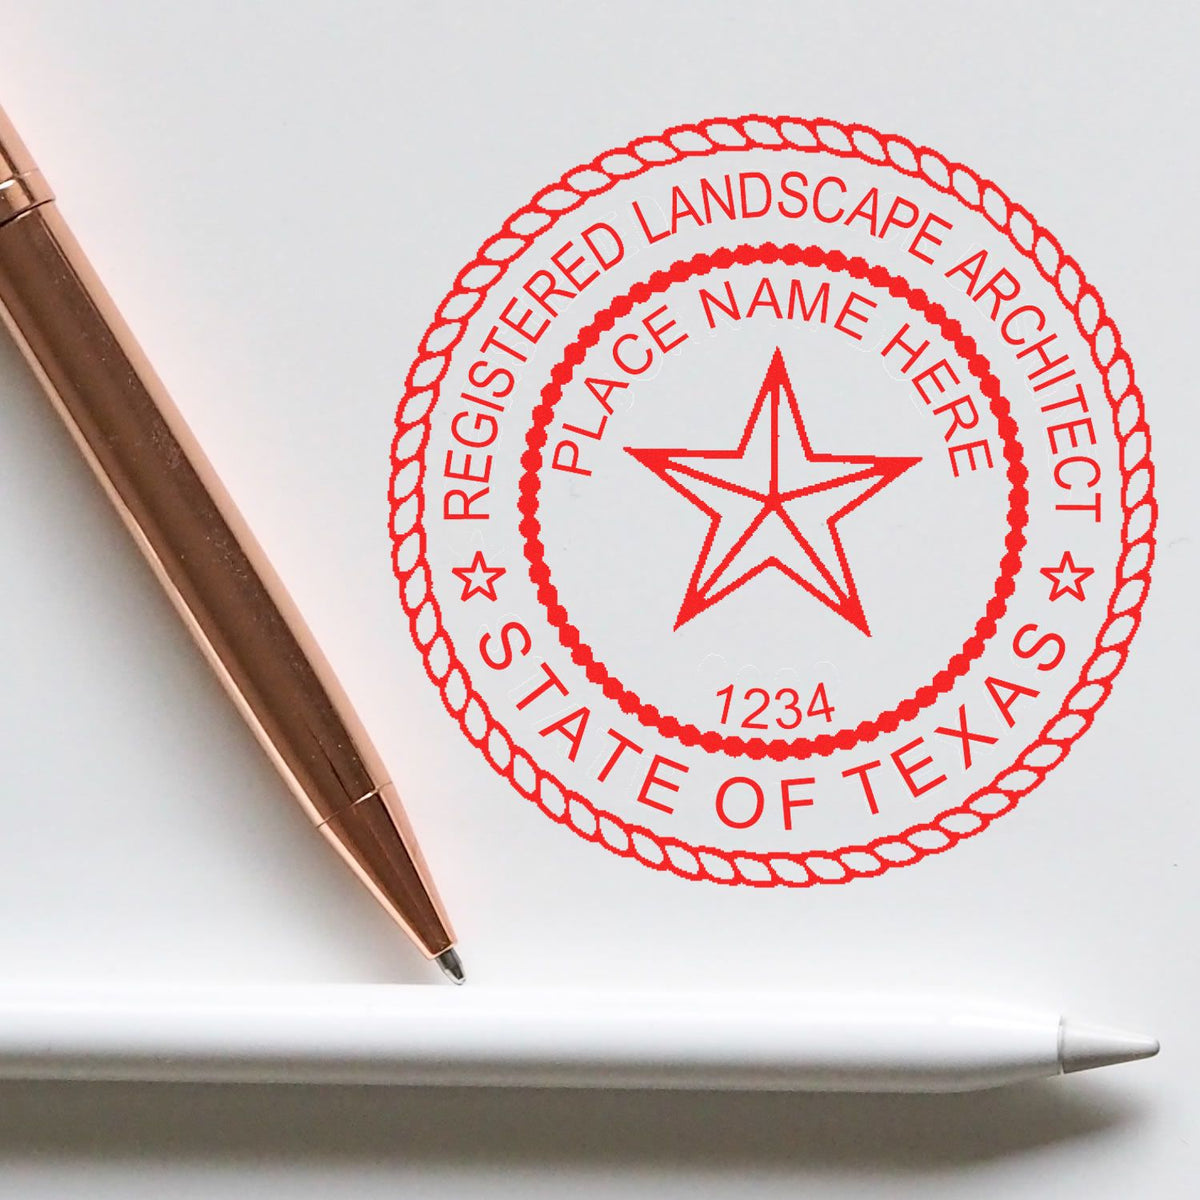 A photograph of the Digital Texas Landscape Architect Stamp stamp impression reveals a vivid, professional image of the on paper.